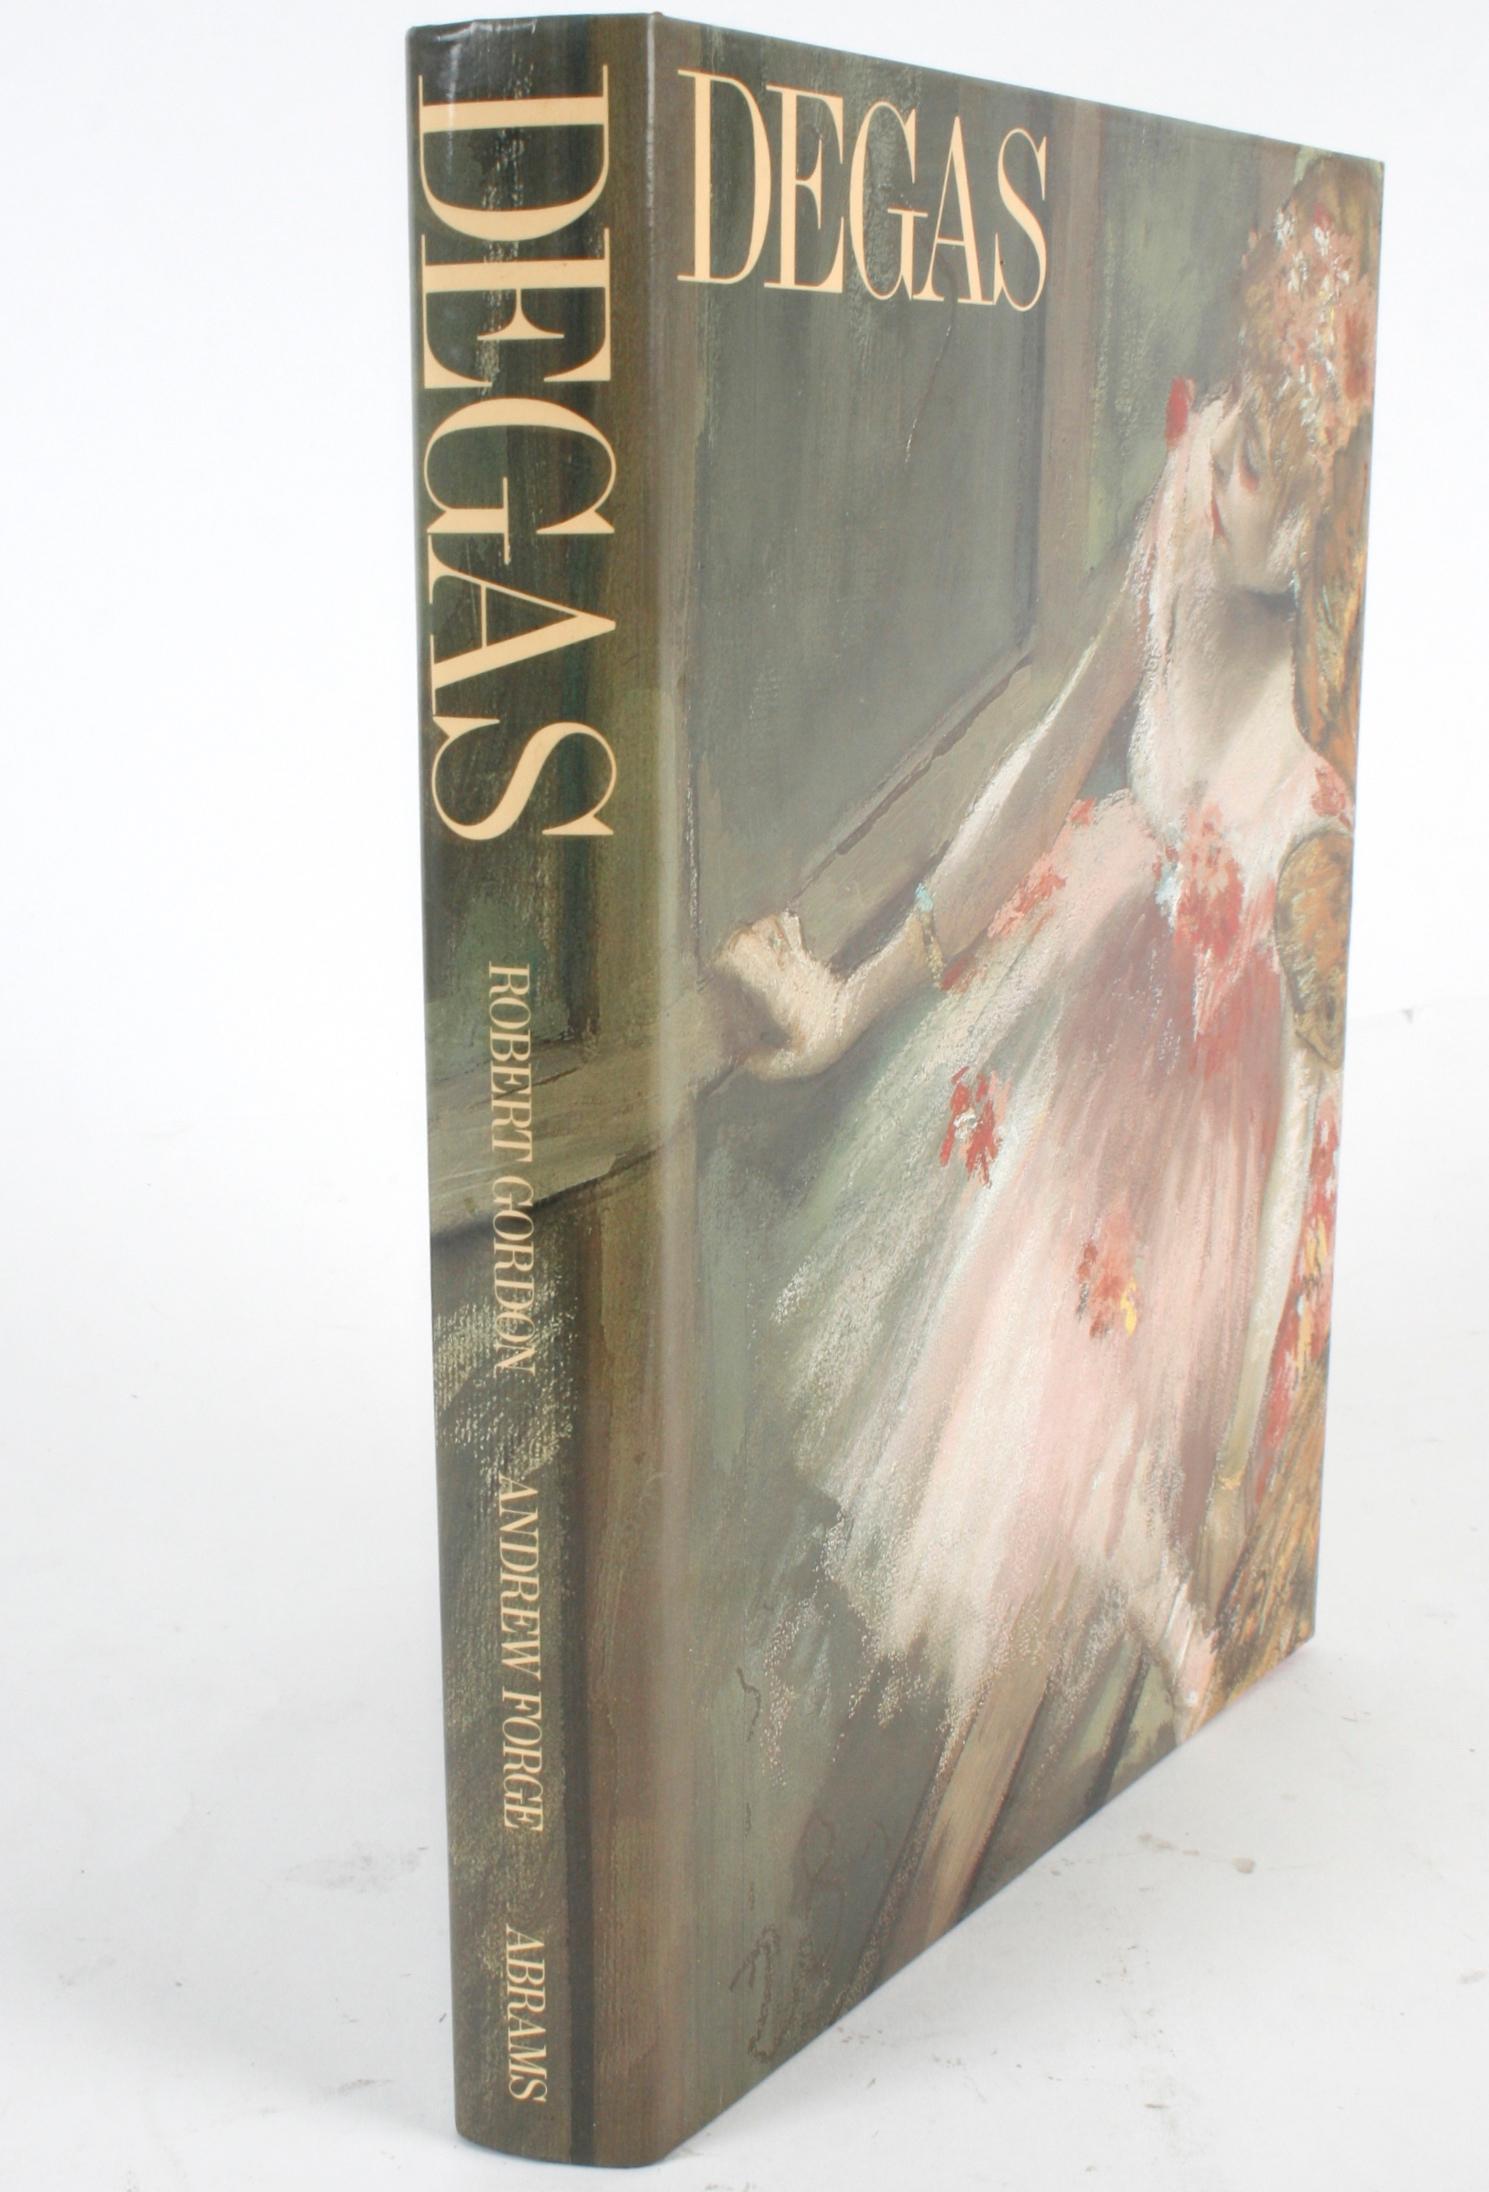 Degas by Robert Gordon and Andrew Forge, Signed and Inscribed Edition 13